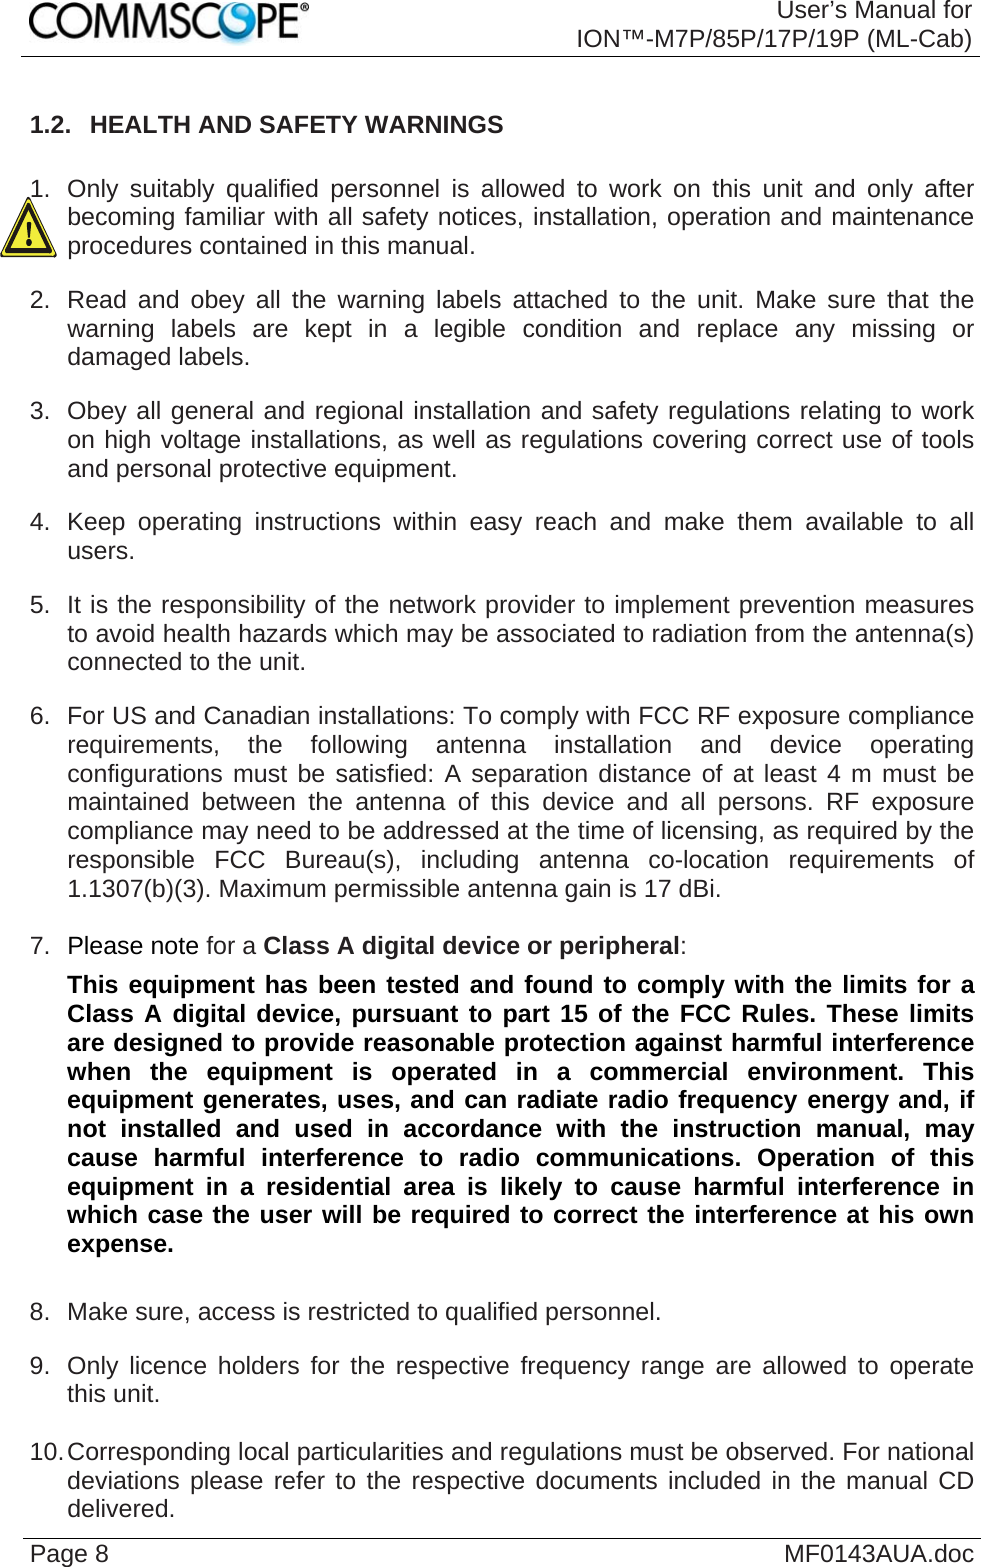  User’s Manual for ION™-M7P/85P/17P/19P (ML-Cab) Page 8  MF0143AUA.doc1.2.  HEALTH AND SAFETY WARNINGS  1.  Only suitably qualified personnel is allowed to work on this unit and only after becoming familiar with all safety notices, installation, operation and maintenance procedures contained in this manual. 2.  Read and obey all the warning labels attached to the unit. Make sure that the warning labels are kept in a legible condition and replace any missing or damaged labels. 3.  Obey all general and regional installation and safety regulations relating to work on high voltage installations, as well as regulations covering correct use of tools and personal protective equipment. 4.  Keep operating instructions within easy reach and make them available to all users. 5.  It is the responsibility of the network provider to implement prevention measures to avoid health hazards which may be associated to radiation from the antenna(s) connected to the unit. 6.  For US and Canadian installations: To comply with FCC RF exposure compliance requirements, the following antenna installation and device operating configurations must be satisfied: A separation distance of at least 4 m must be maintained between the antenna of this device and all persons. RF exposure compliance may need to be addressed at the time of licensing, as required by the responsible FCC Bureau(s), including antenna co-location requirements of 1.1307(b)(3). Maximum permissible antenna gain is 17 dBi.  7.  Please note for a Class A digital device or peripheral: This equipment has been tested and found to comply with the limits for a Class A digital device, pursuant to part 15 of the FCC Rules. These limits are designed to provide reasonable protection against harmful interference when the equipment is operated in a commercial environment. This equipment generates, uses, and can radiate radio frequency energy and, if not installed and used in accordance with the instruction manual, may cause harmful interference to radio communications. Operation of this equipment in a residential area is likely to cause harmful interference in which case the user will be required to correct the interference at his own expense.  8.  Make sure, access is restricted to qualified personnel. 9.  Only licence holders for the respective frequency range are allowed to operate this unit.  10. Corresponding local particularities and regulations must be observed. For national deviations please refer to the respective documents included in the manual CD delivered.  